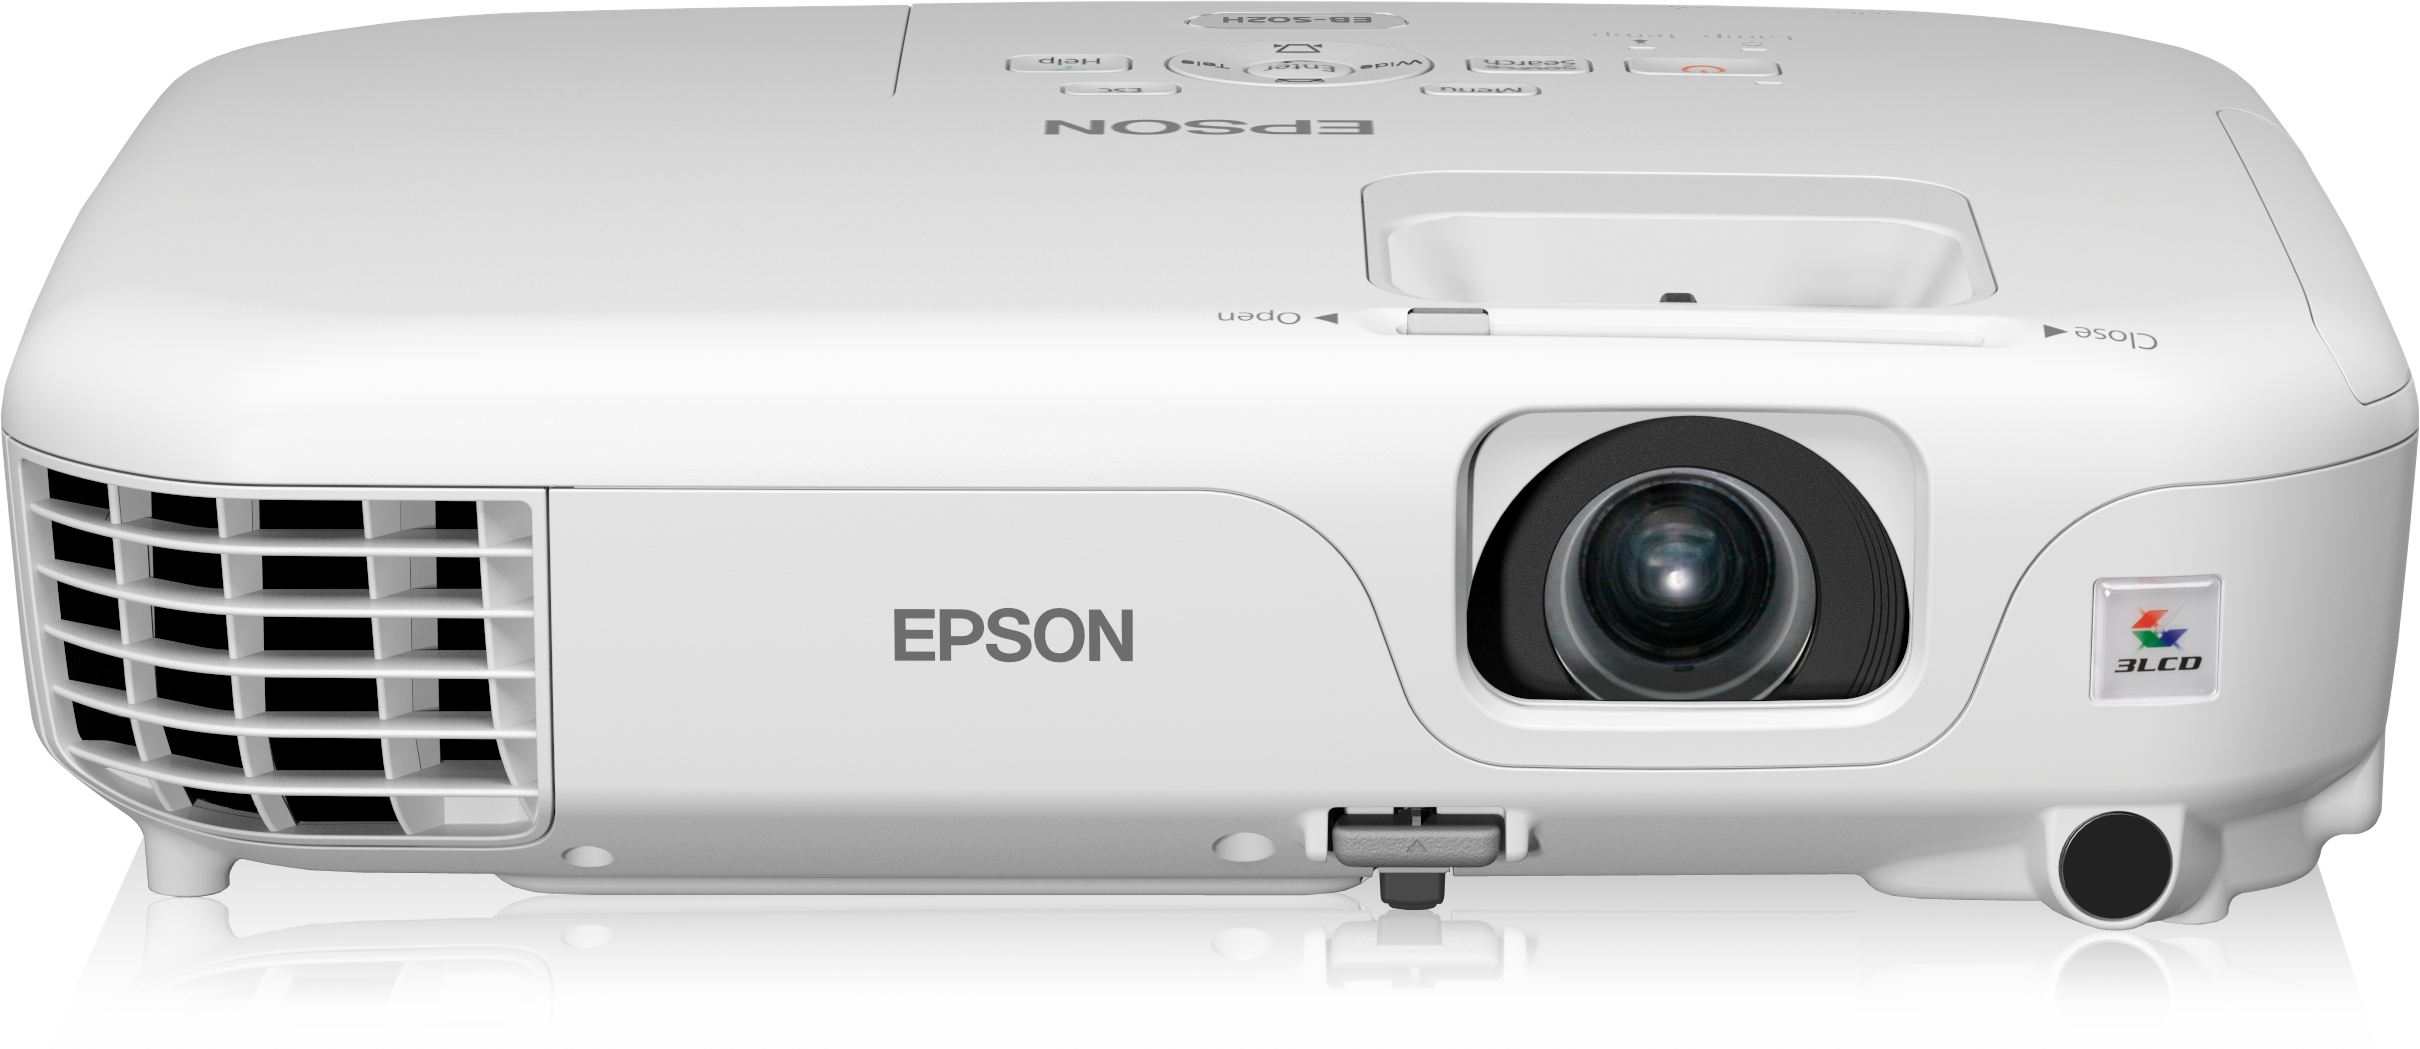 Epson EB-S02H | Mobile | Projectors | Products | Epson Europe